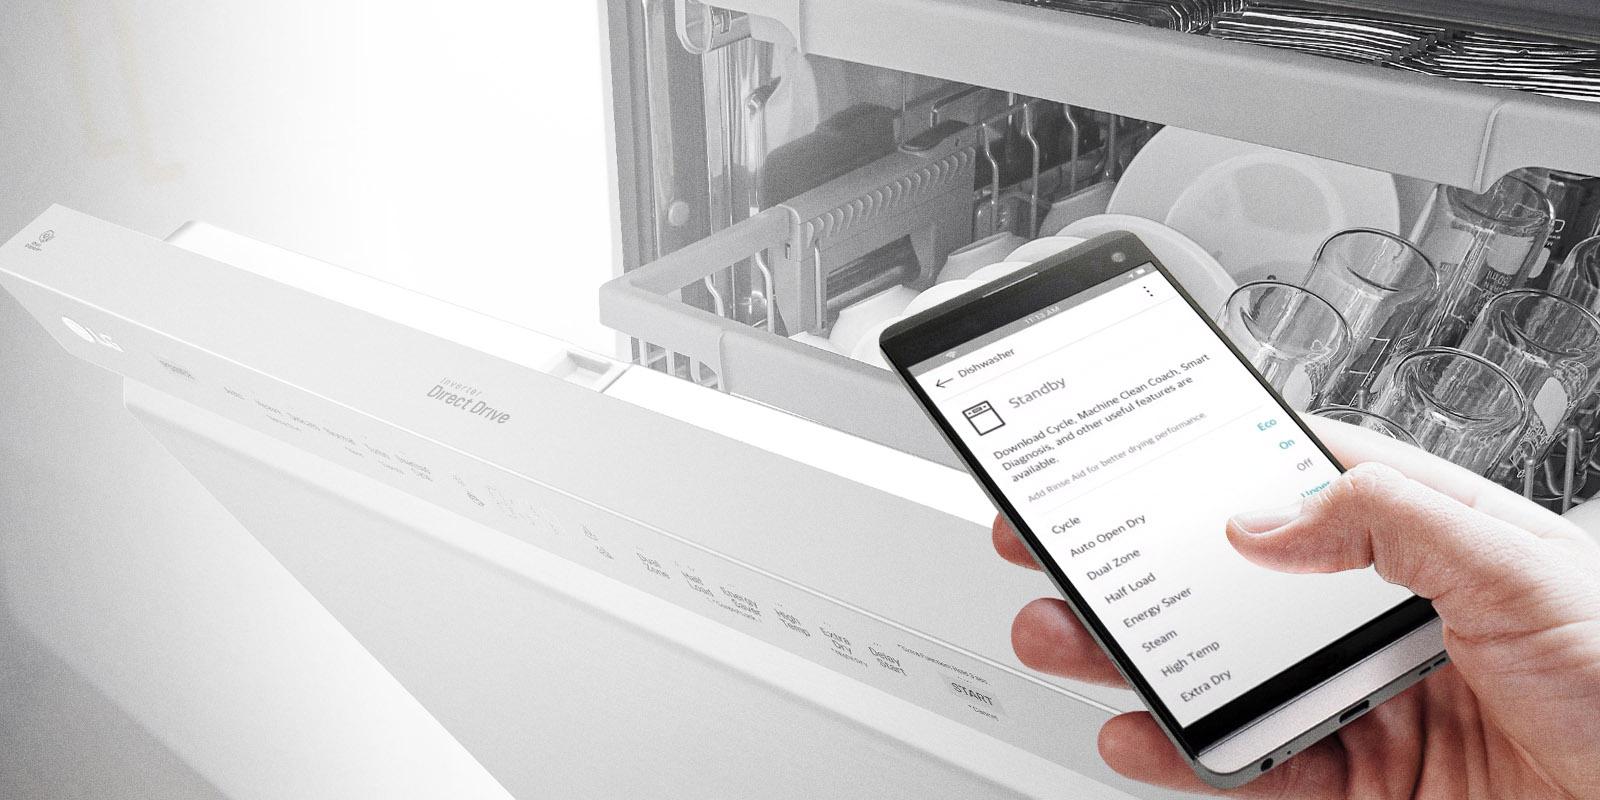 Download New Cycles From Your Phone To Your Dishwasher